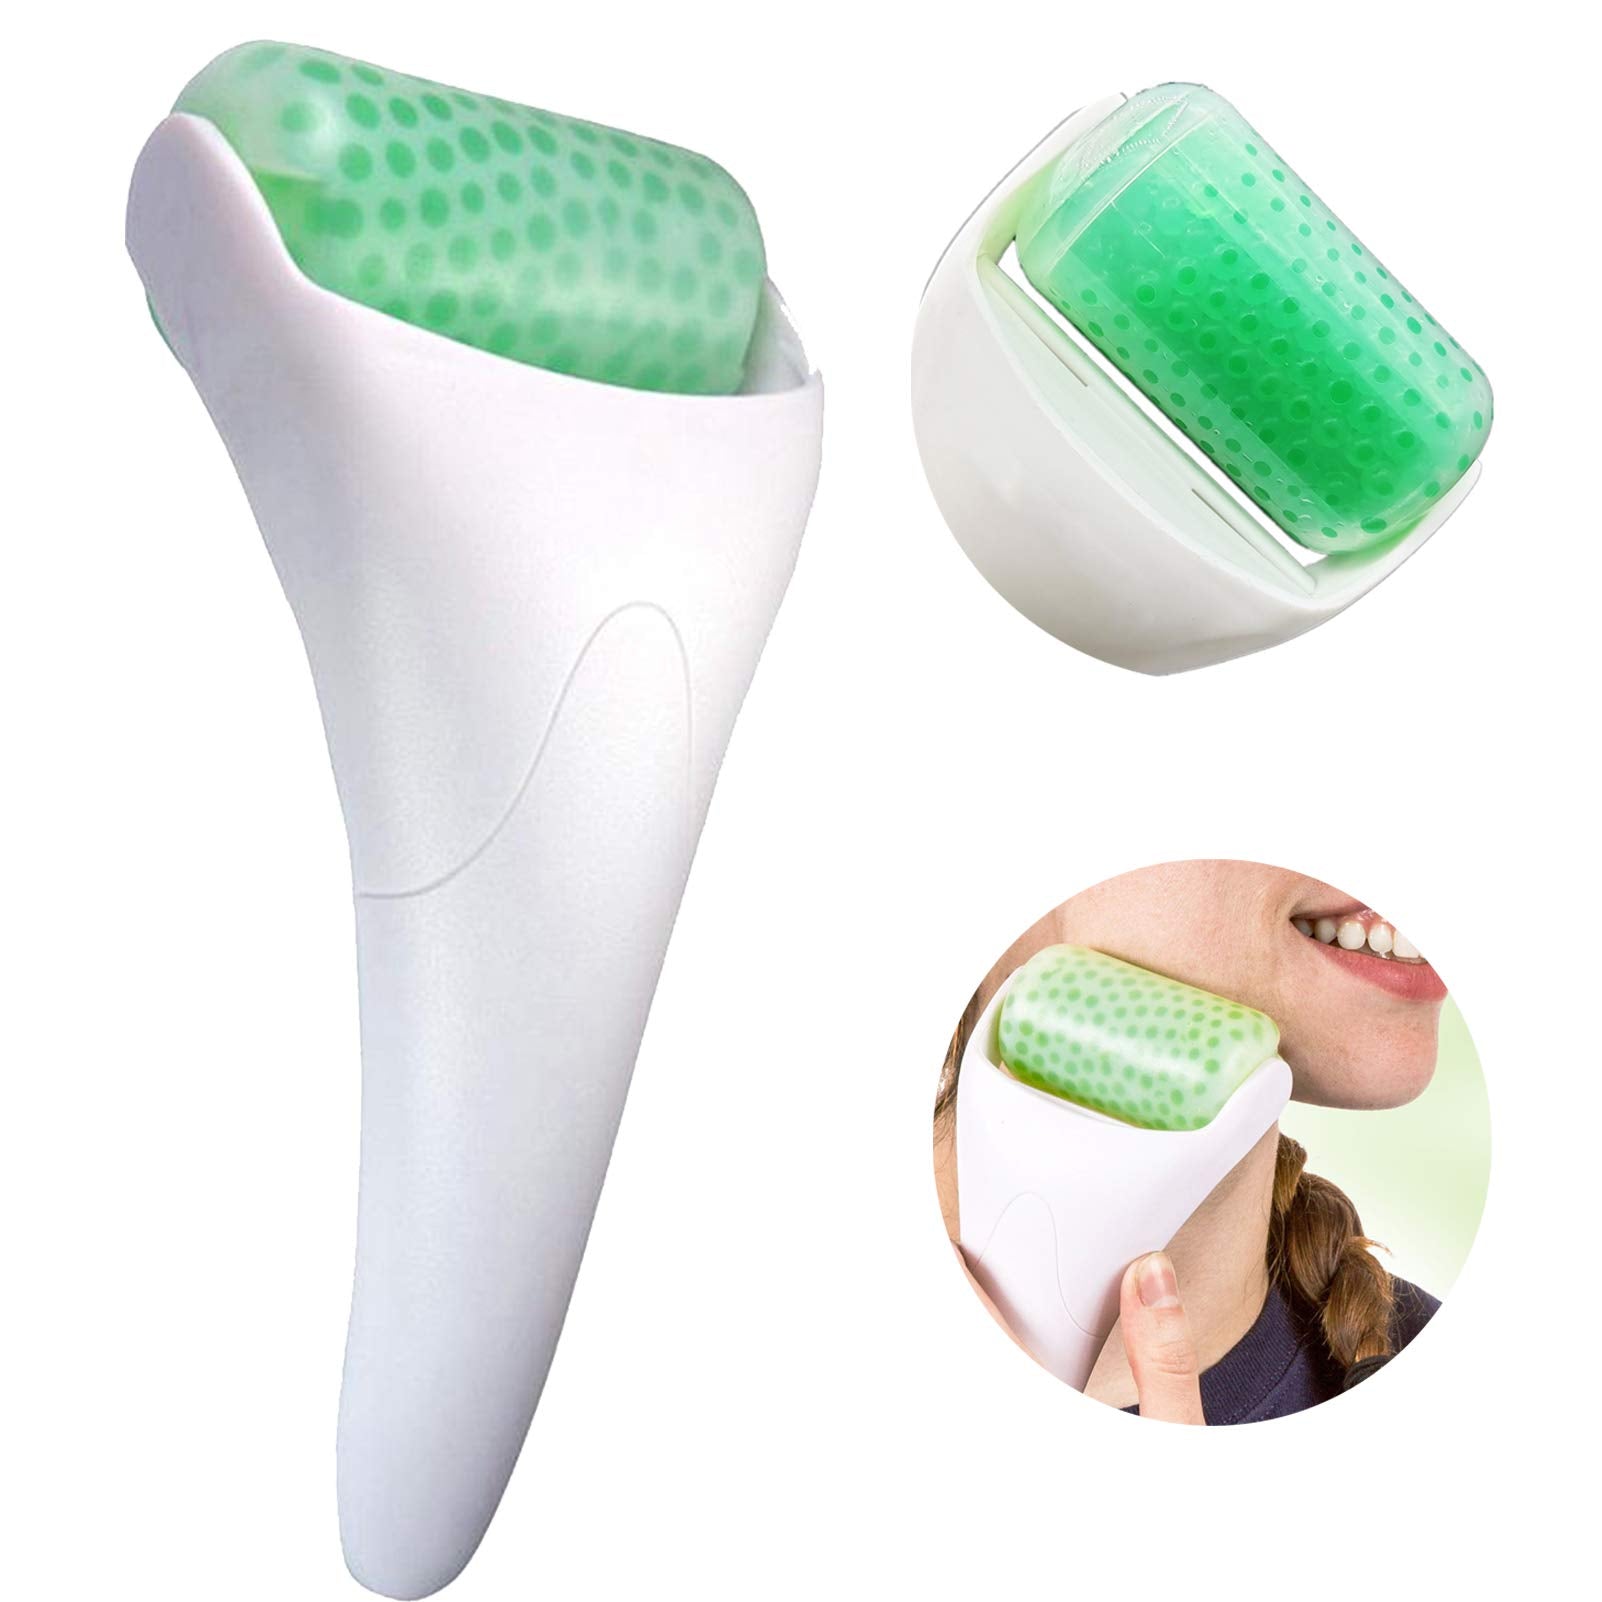 Ice Roller for Face Eyes, Massager Tool Reduce Puffiness, Wrinkles, Migraine, Pain Relief and Minor Injury (Big Ice Roller)